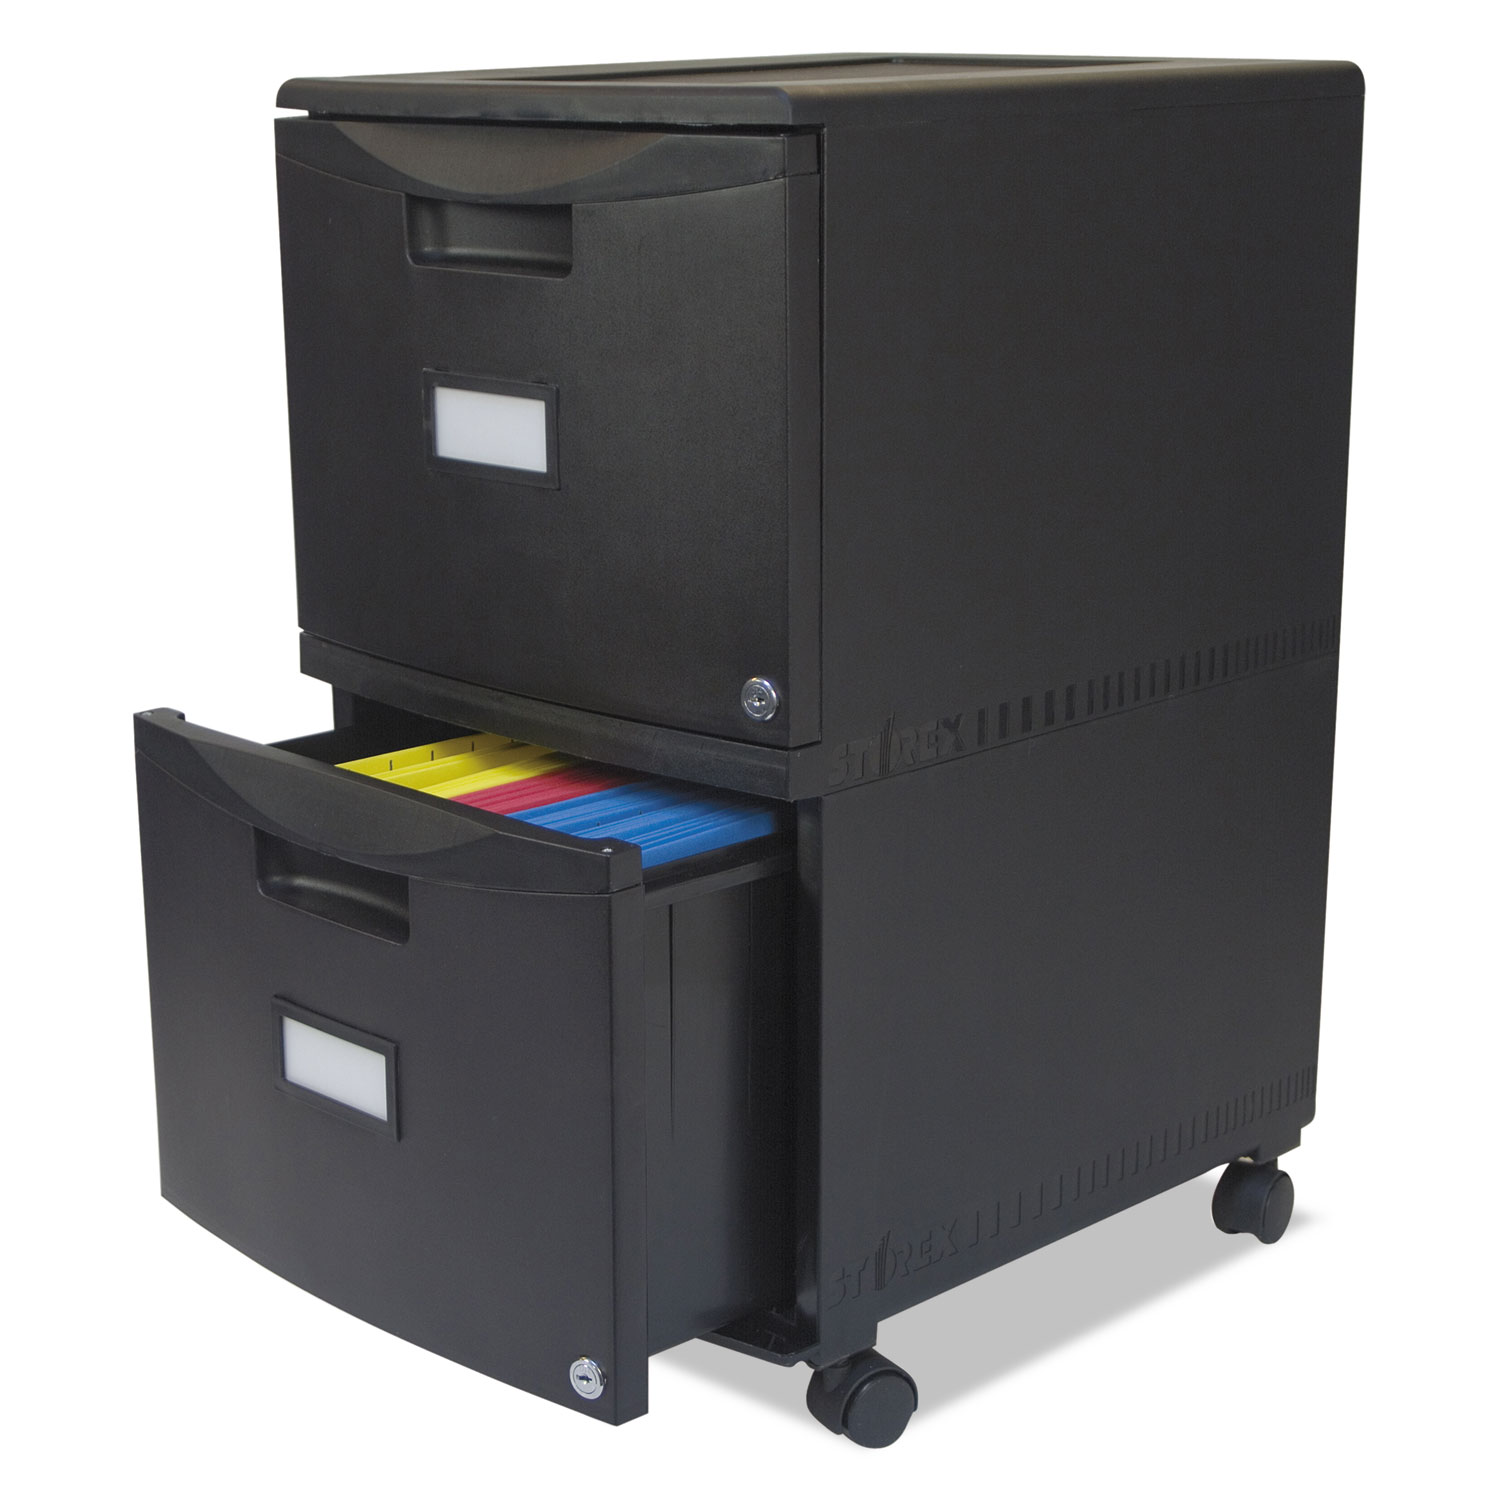 Two-Drawer Mobile Filing Cabinet, 14-3/4w x 18-1/4d x 26h, Black